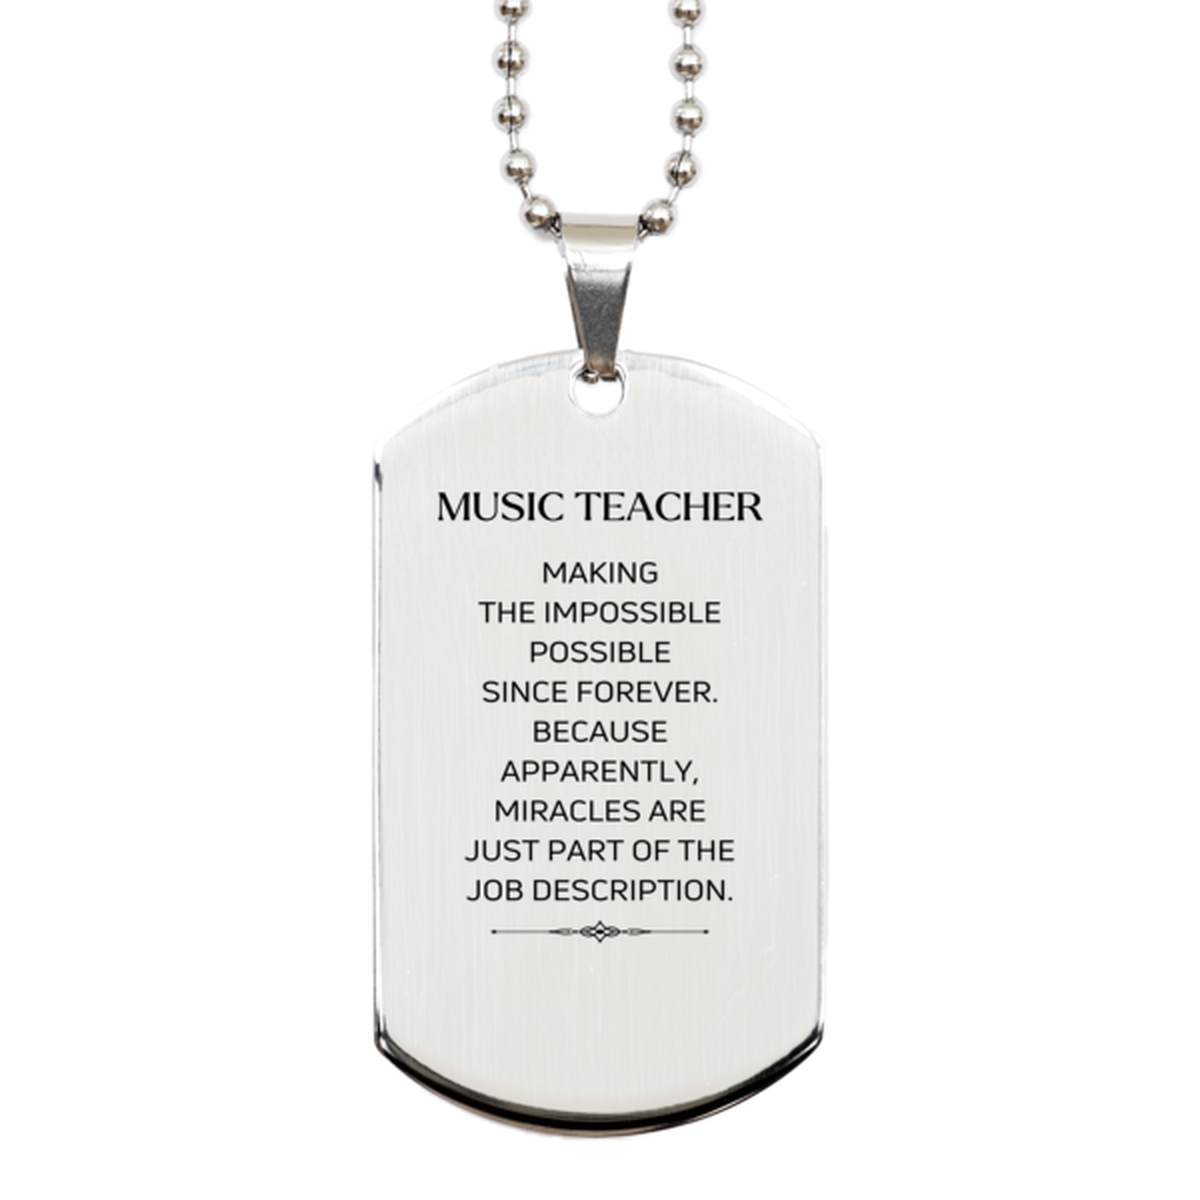 Funny Music Teacher Gifts, Miracles are just part of the job description, Inspirational Birthday Silver Dog Tag For Music Teacher, Men, Women, Coworkers, Friends, Boss